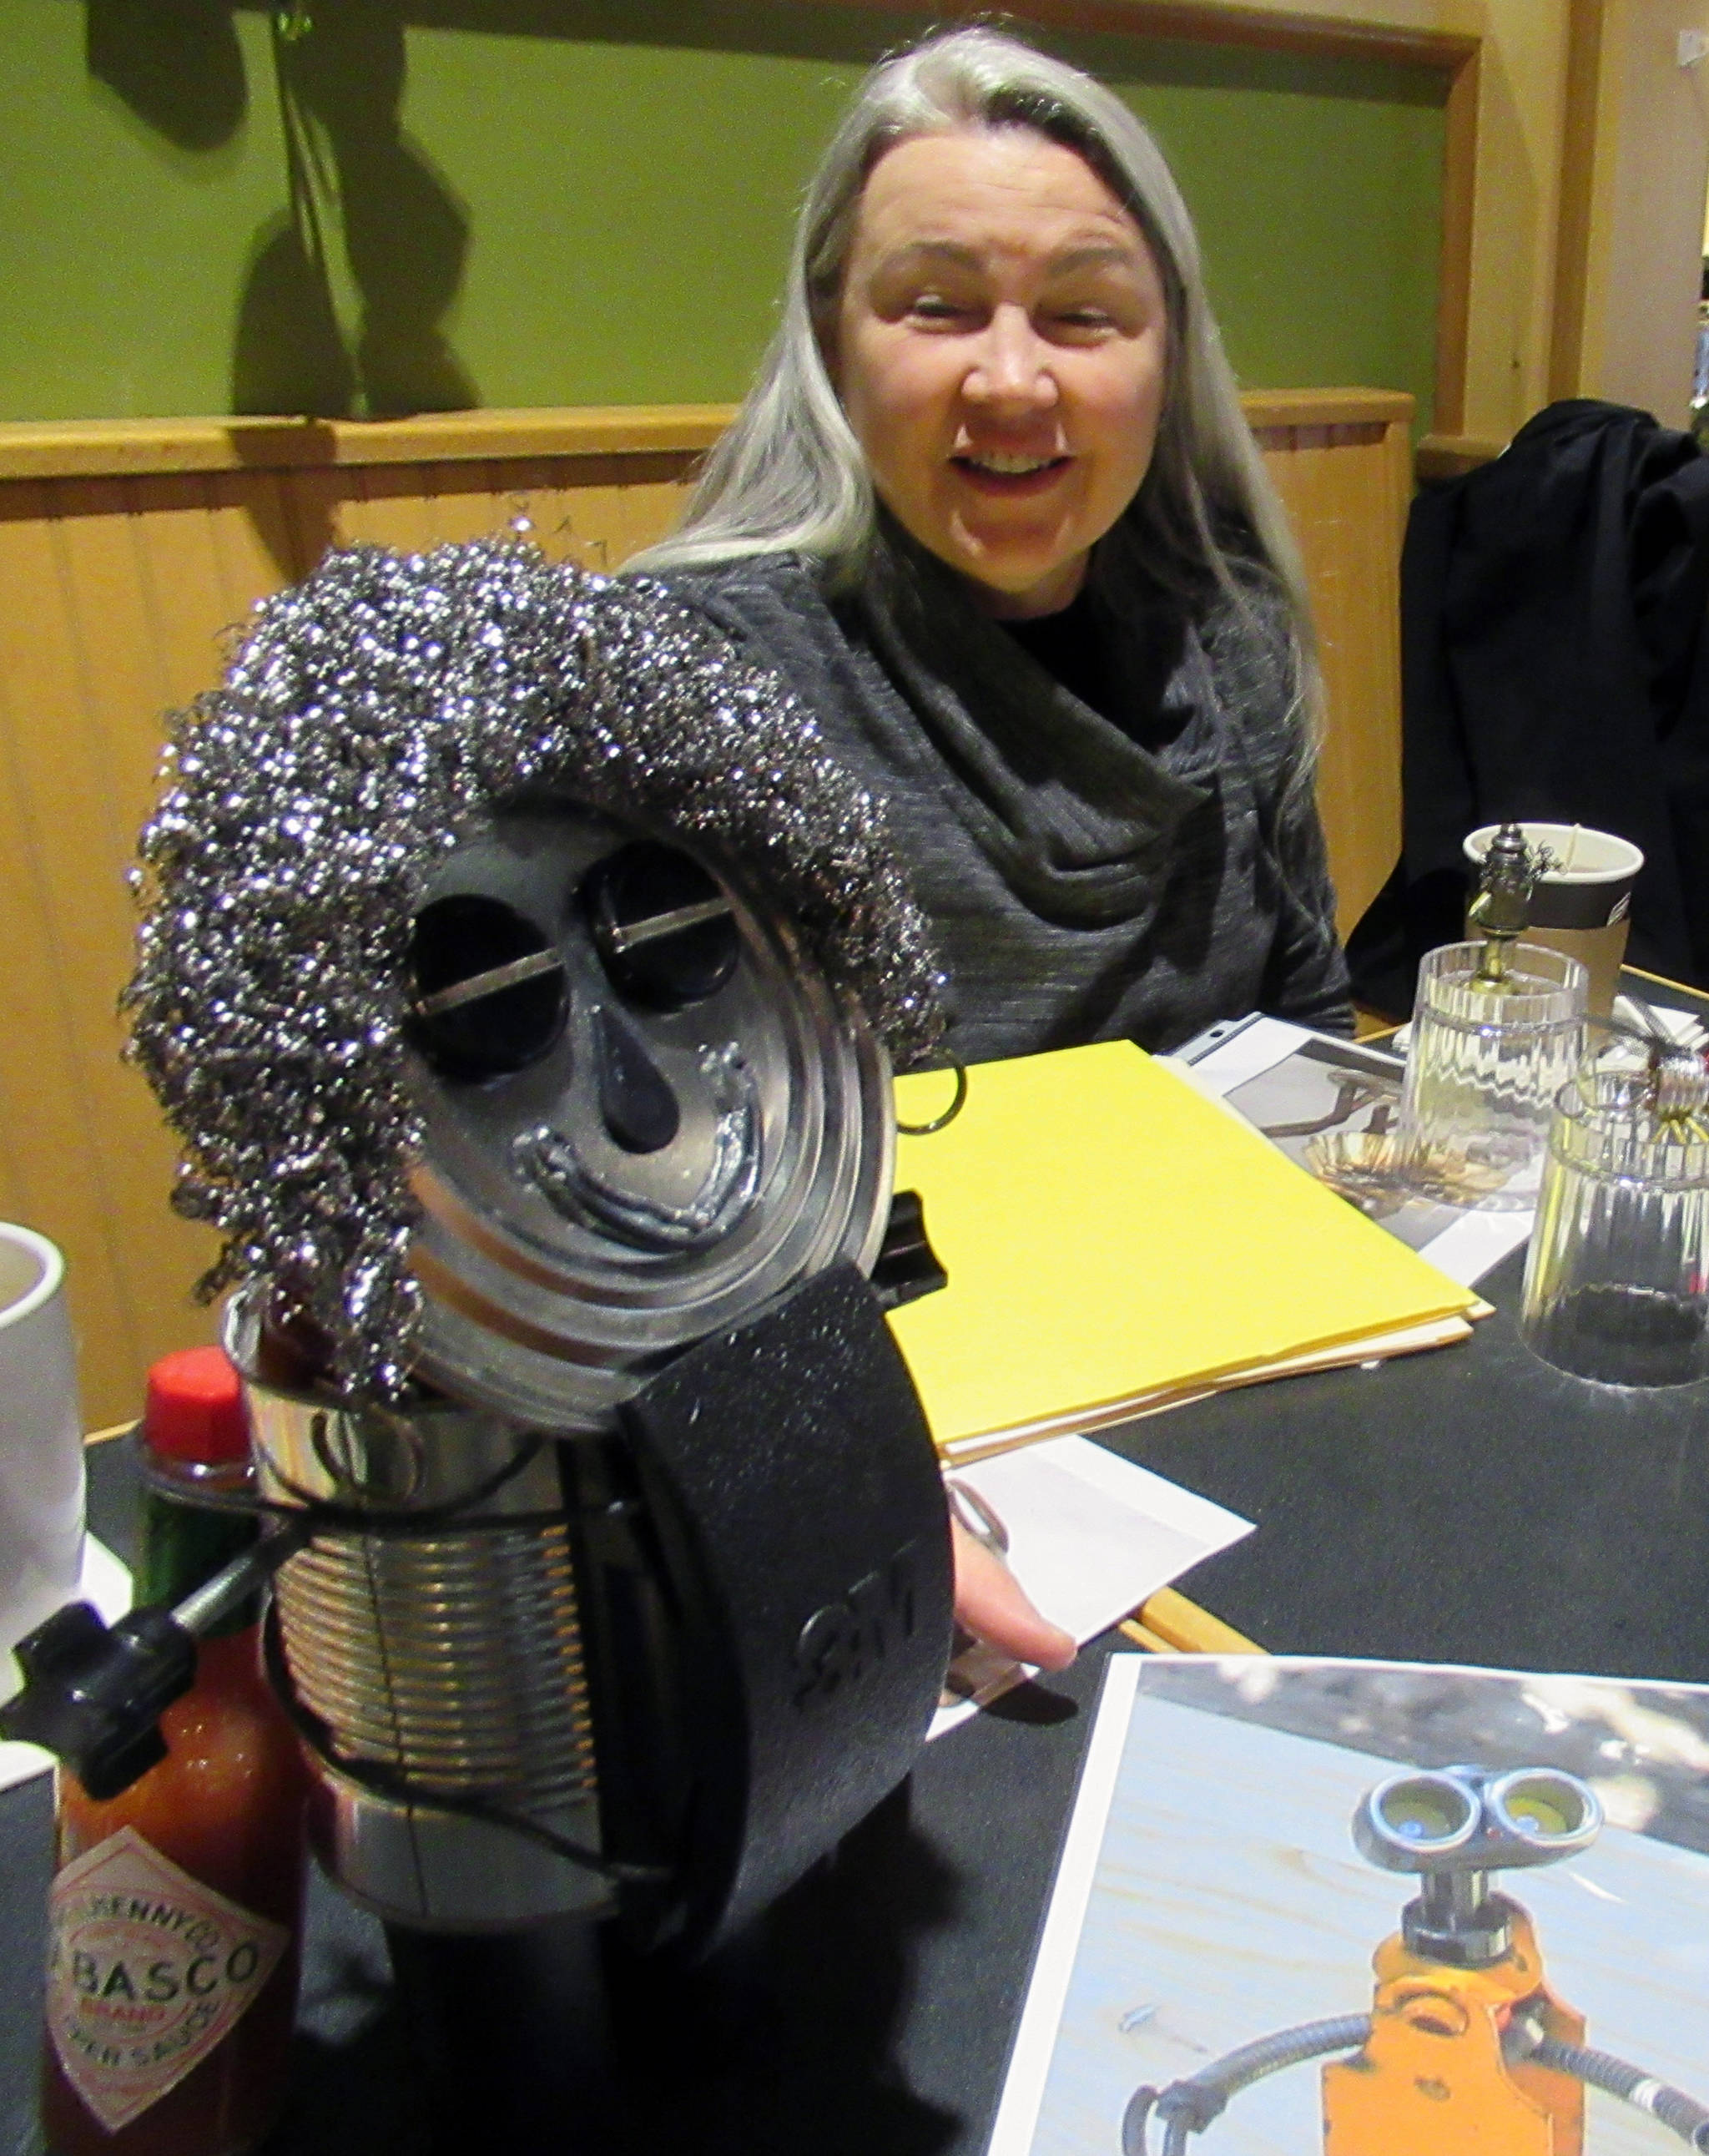 Rotarian Diane Kyser smile said she was able to create her smiley, curly-haired statue in a single morning although a load-bearing bottle of Tabasco sauce was required to keep it standing, Tuesday, March 12, 2019. (Ben Hohenstatt | Juneau Empire)